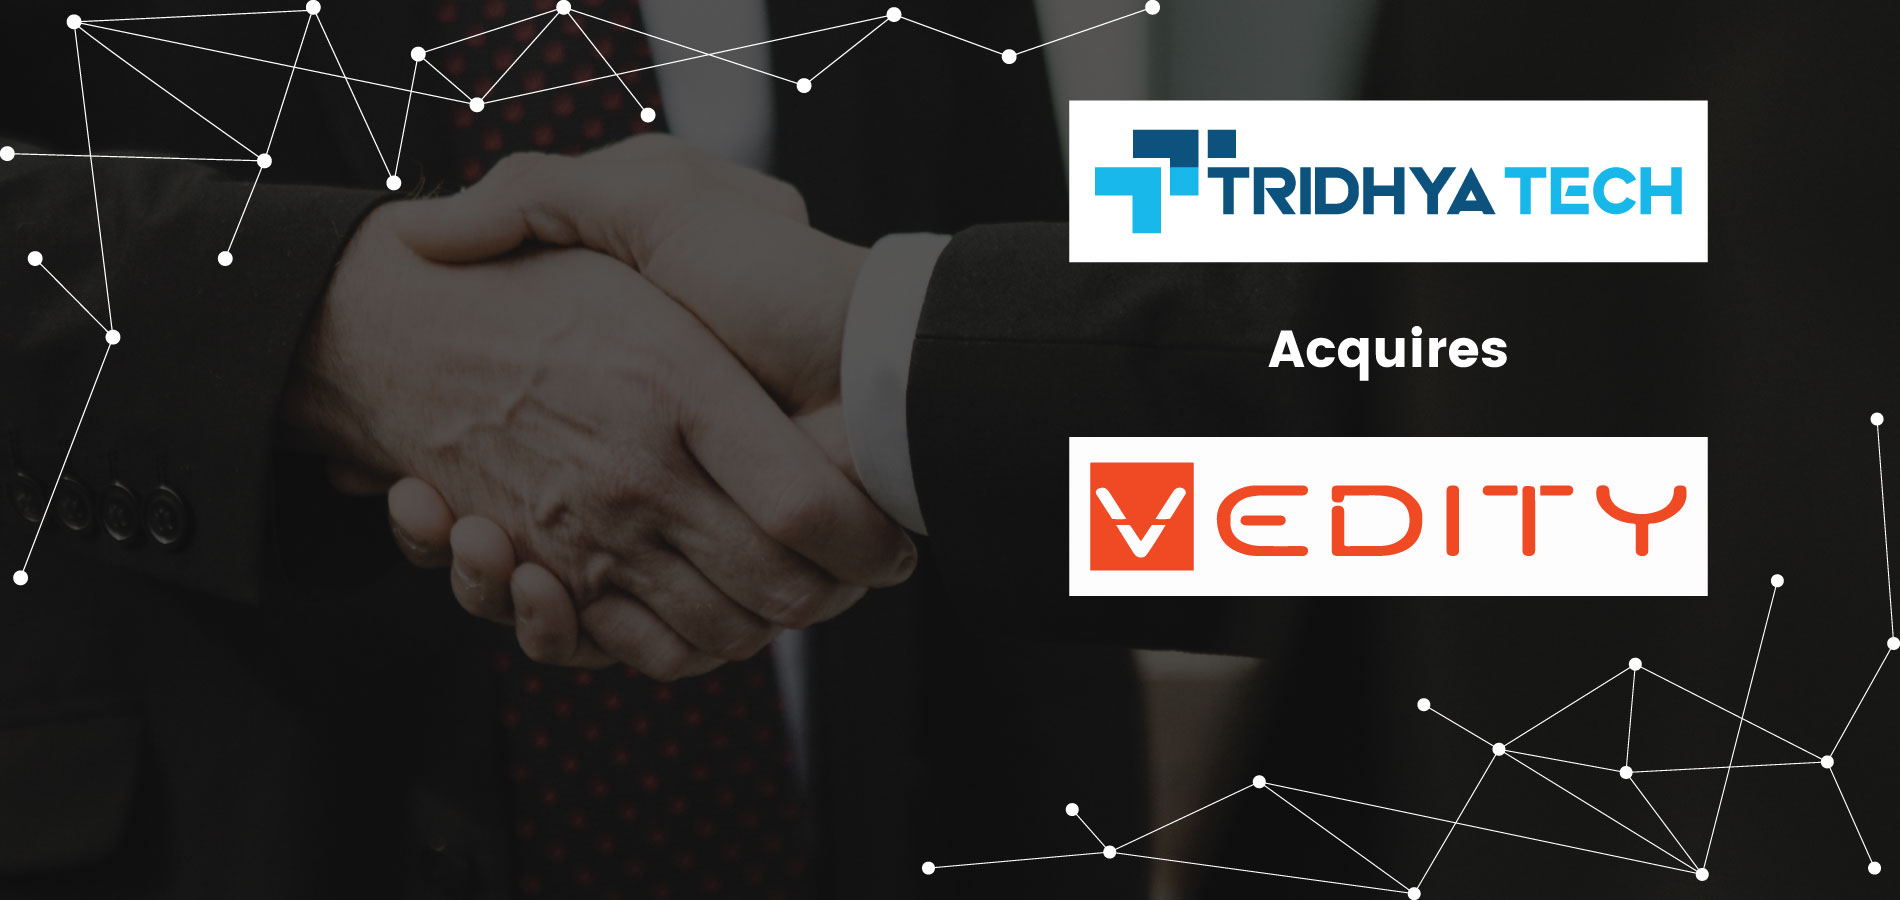 Vedity Software and Tridhya Tech